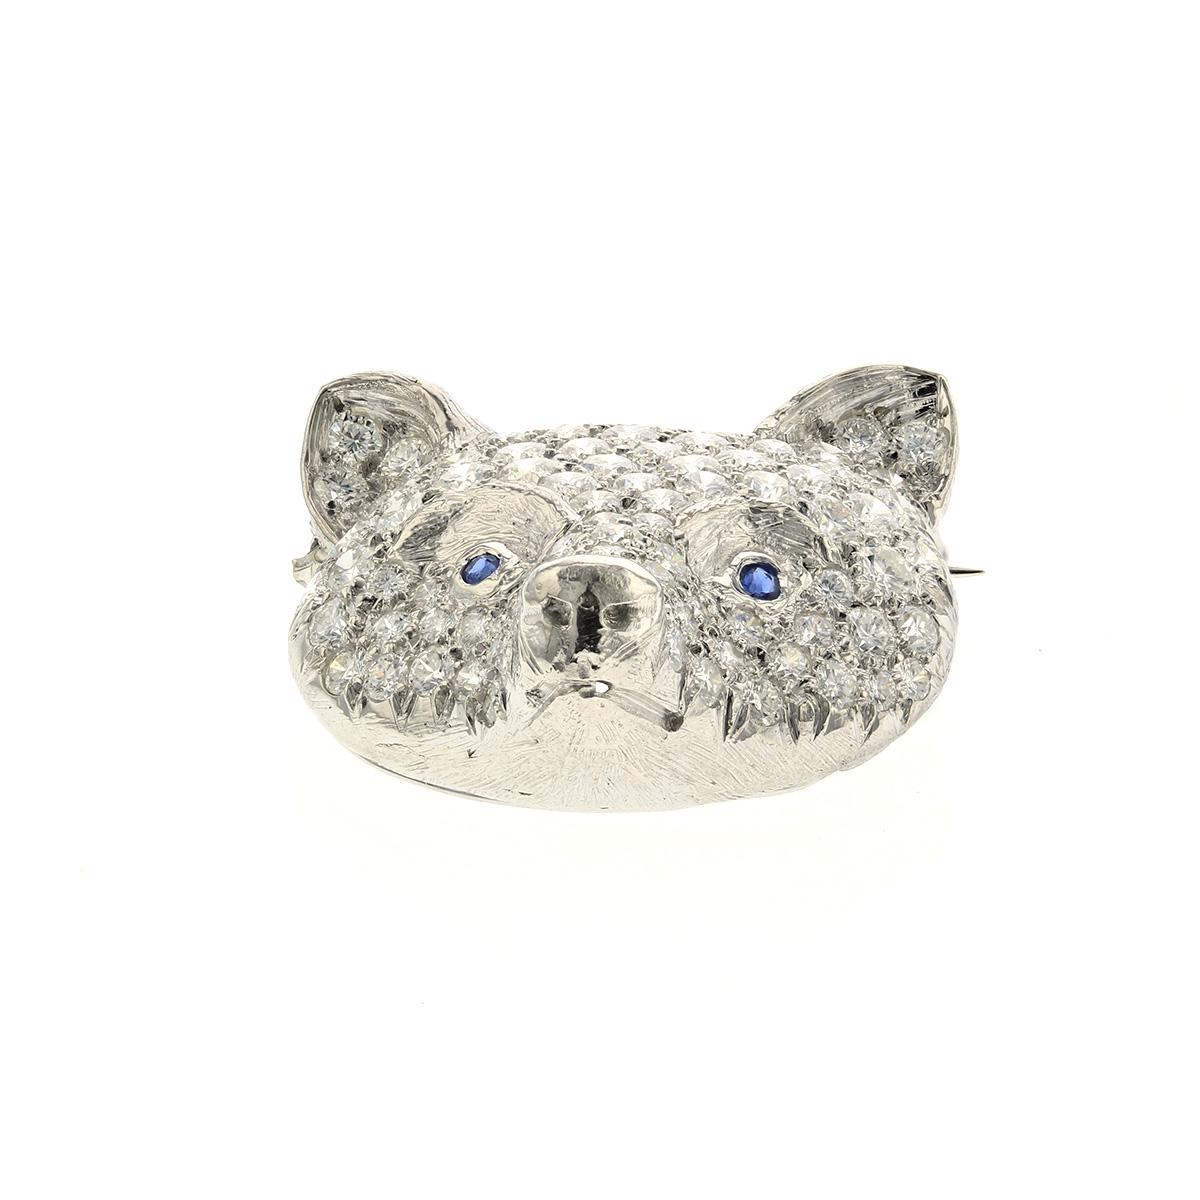 Fox head pin composed of platinum and pavé set diamonds.   There are 98 round brilliant-cut diamonds with a total carat weight of 4.80; F-G color and VVS-VS clarity.  The eyes are two round sapphires totaling .05 carats.  Measures 7/8 inches by 7/8